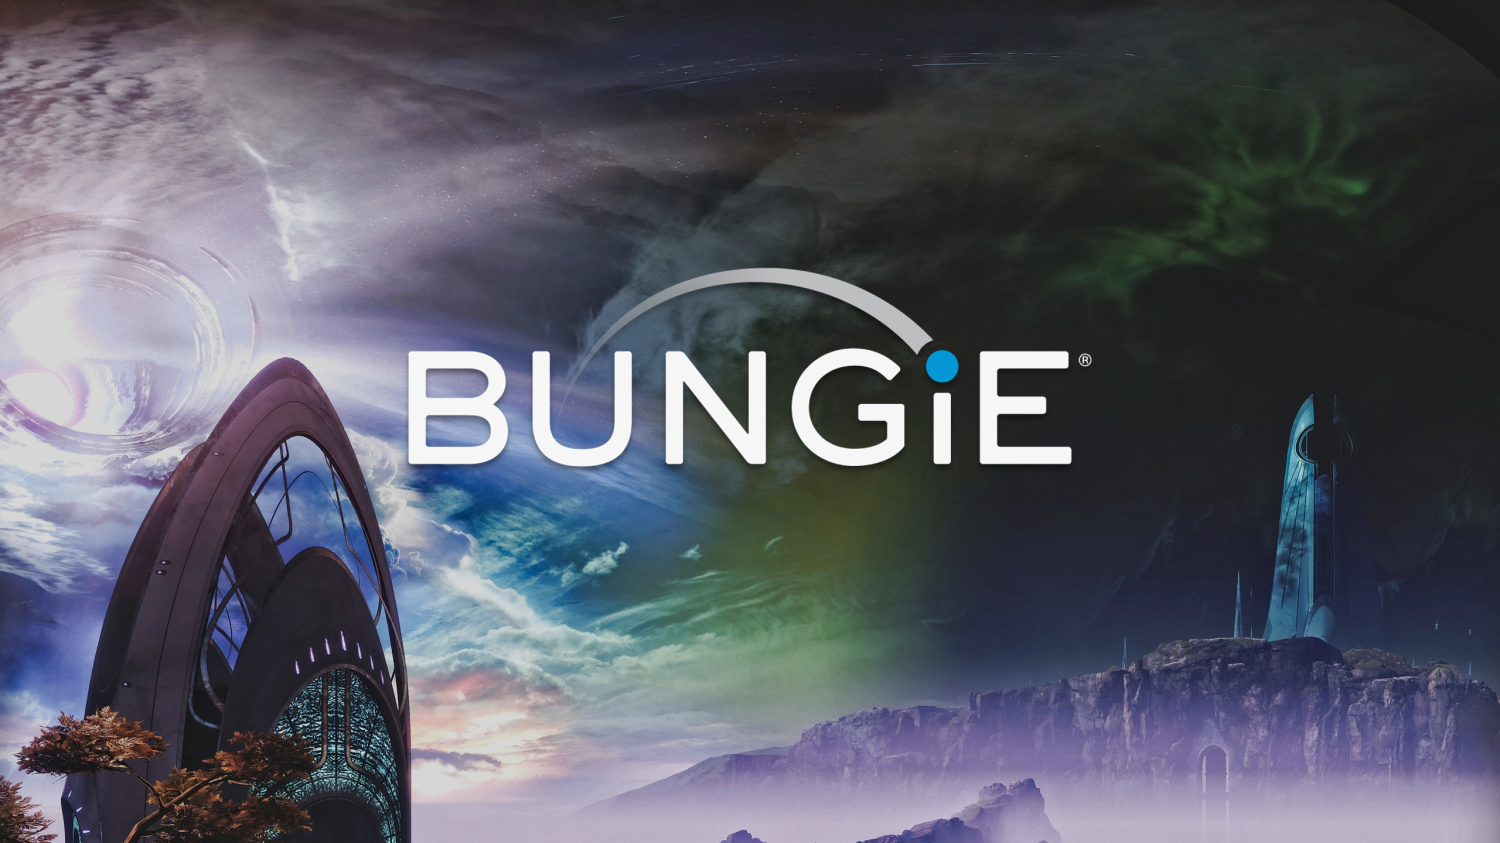 85007_233_bungie-may-have-as-many-4-new-projects-in-the-works_full.png